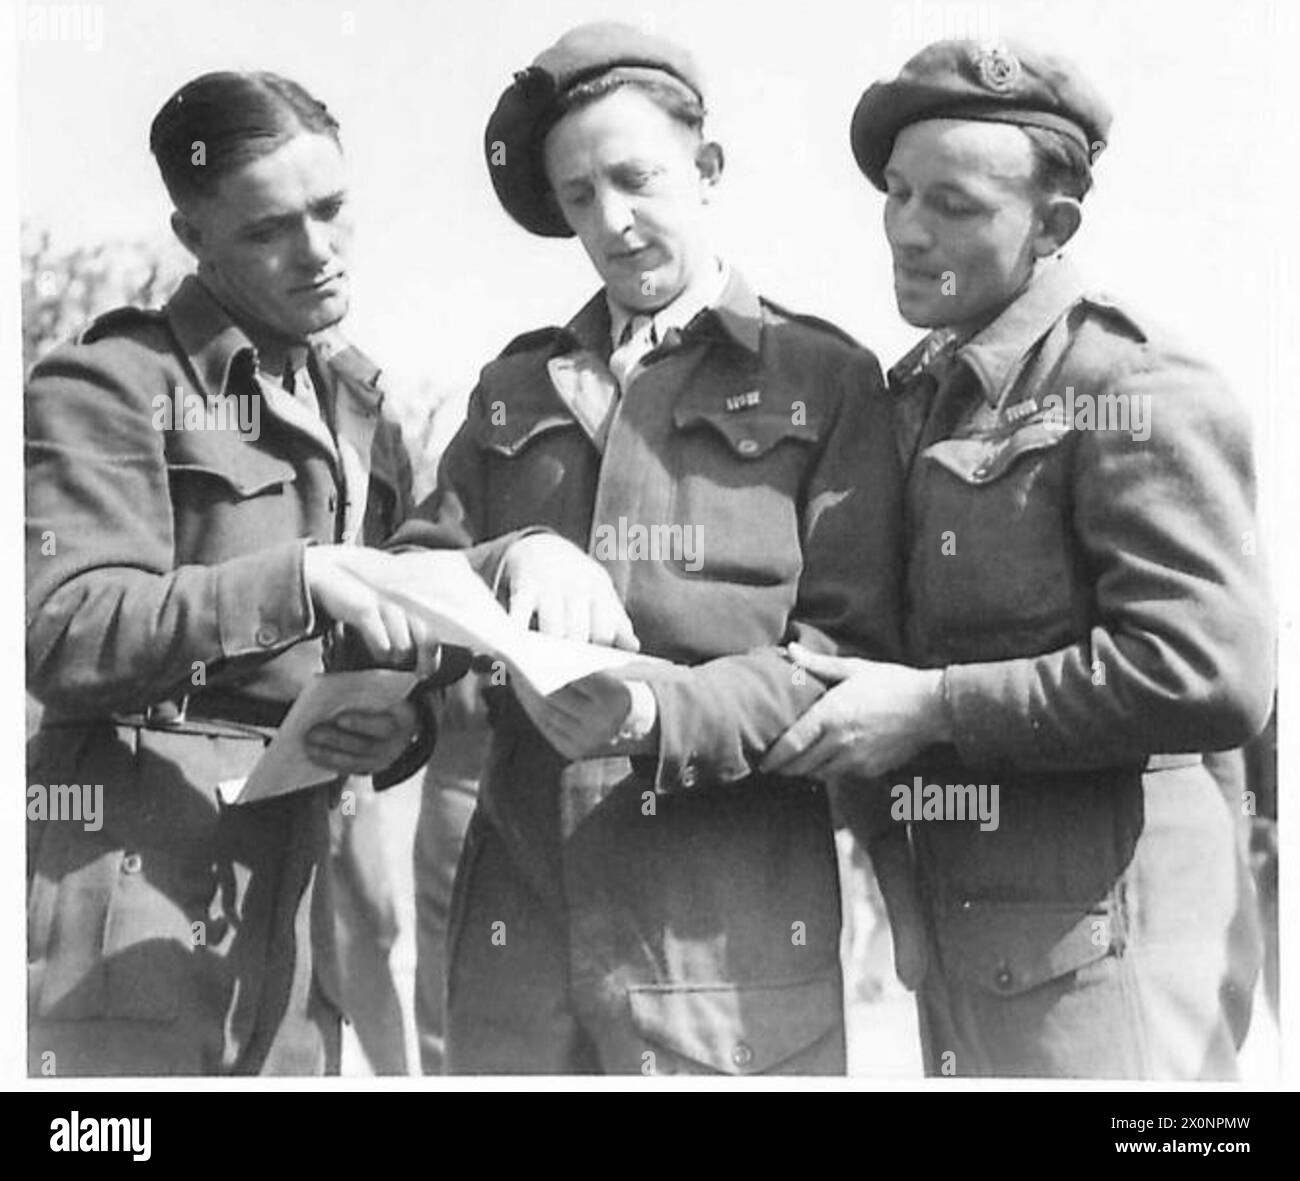 ITALY : RACE MEETING AT FLORENCE - Spr. D. Little (left) of Manchester; Dvr. John Elio of Manchester, and Dvr. Bill Burney also of Manchester, study the card to pick the winner of the 'next one'. Photographic negative , British Army Stock Photo